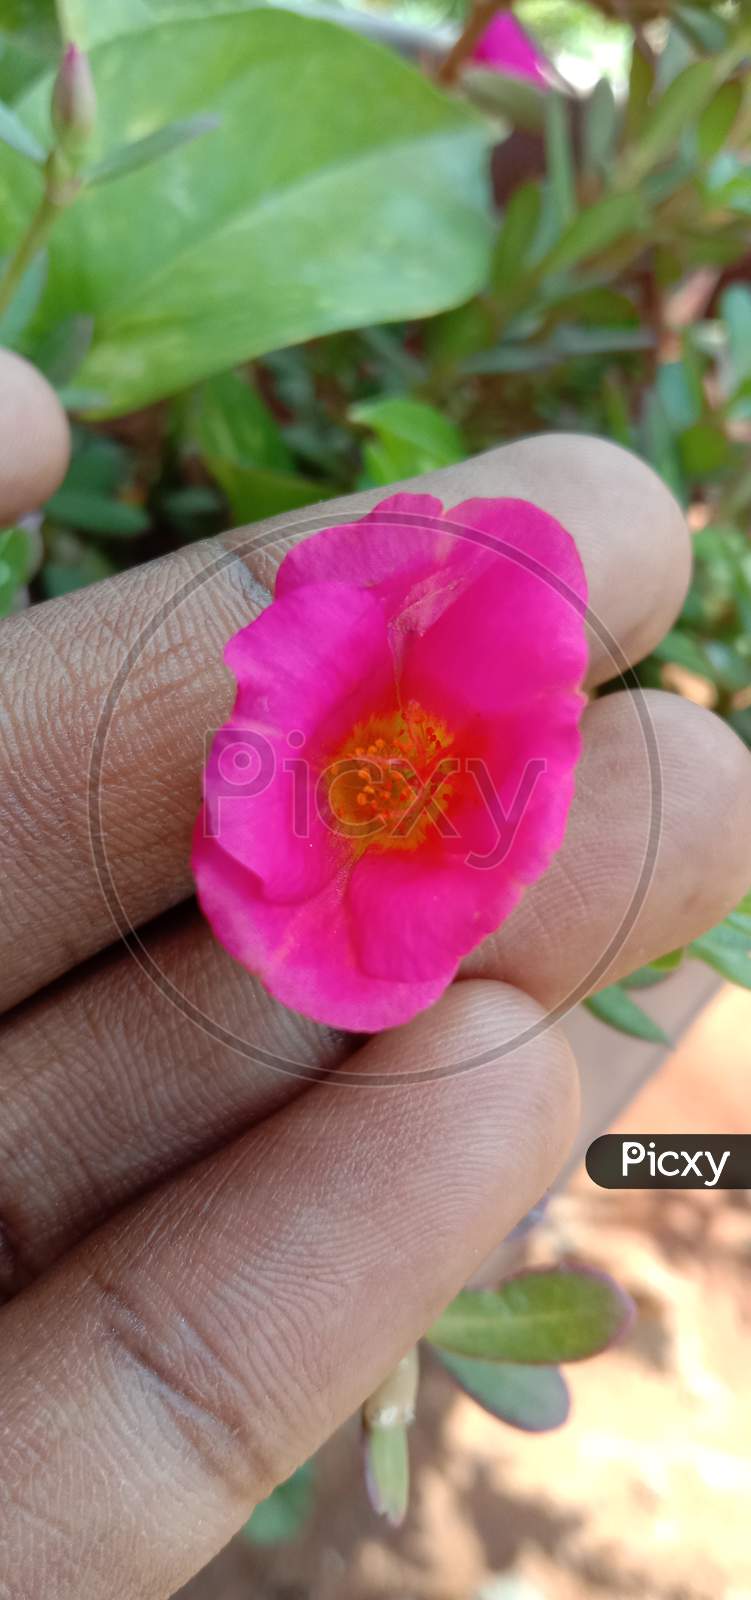 A pink flower in the hand